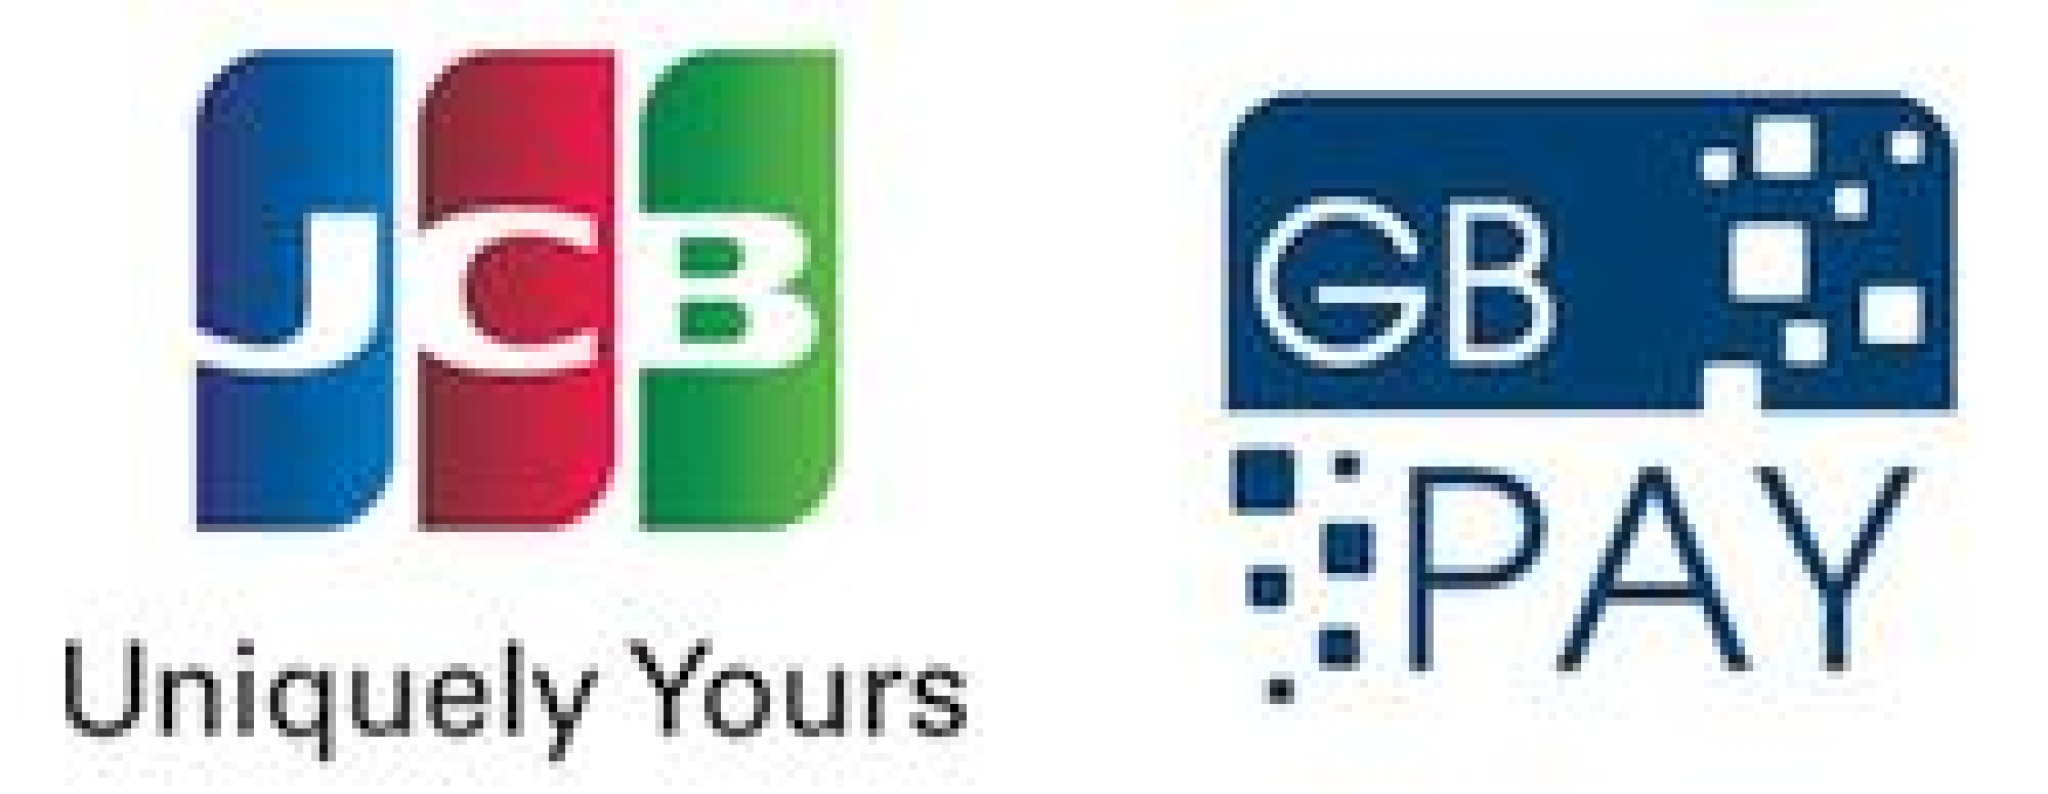 JCB and GB Prime Pay announce partnership to expand online merchant network in Thailand